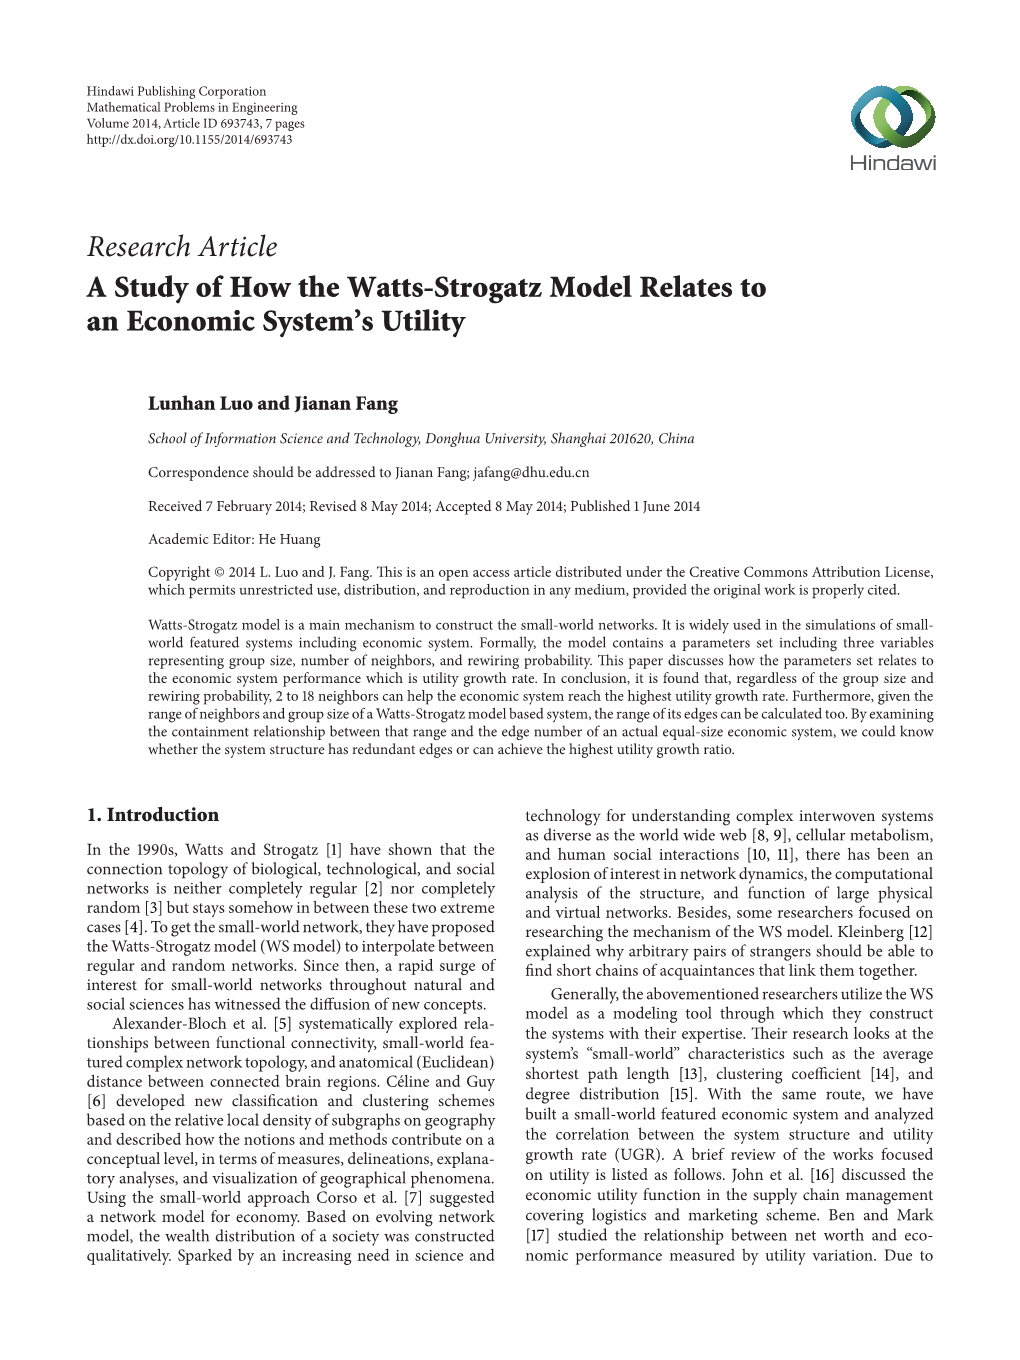 A Study of How the Watts-Strogatz Model Relates to an Economic System’S Utility